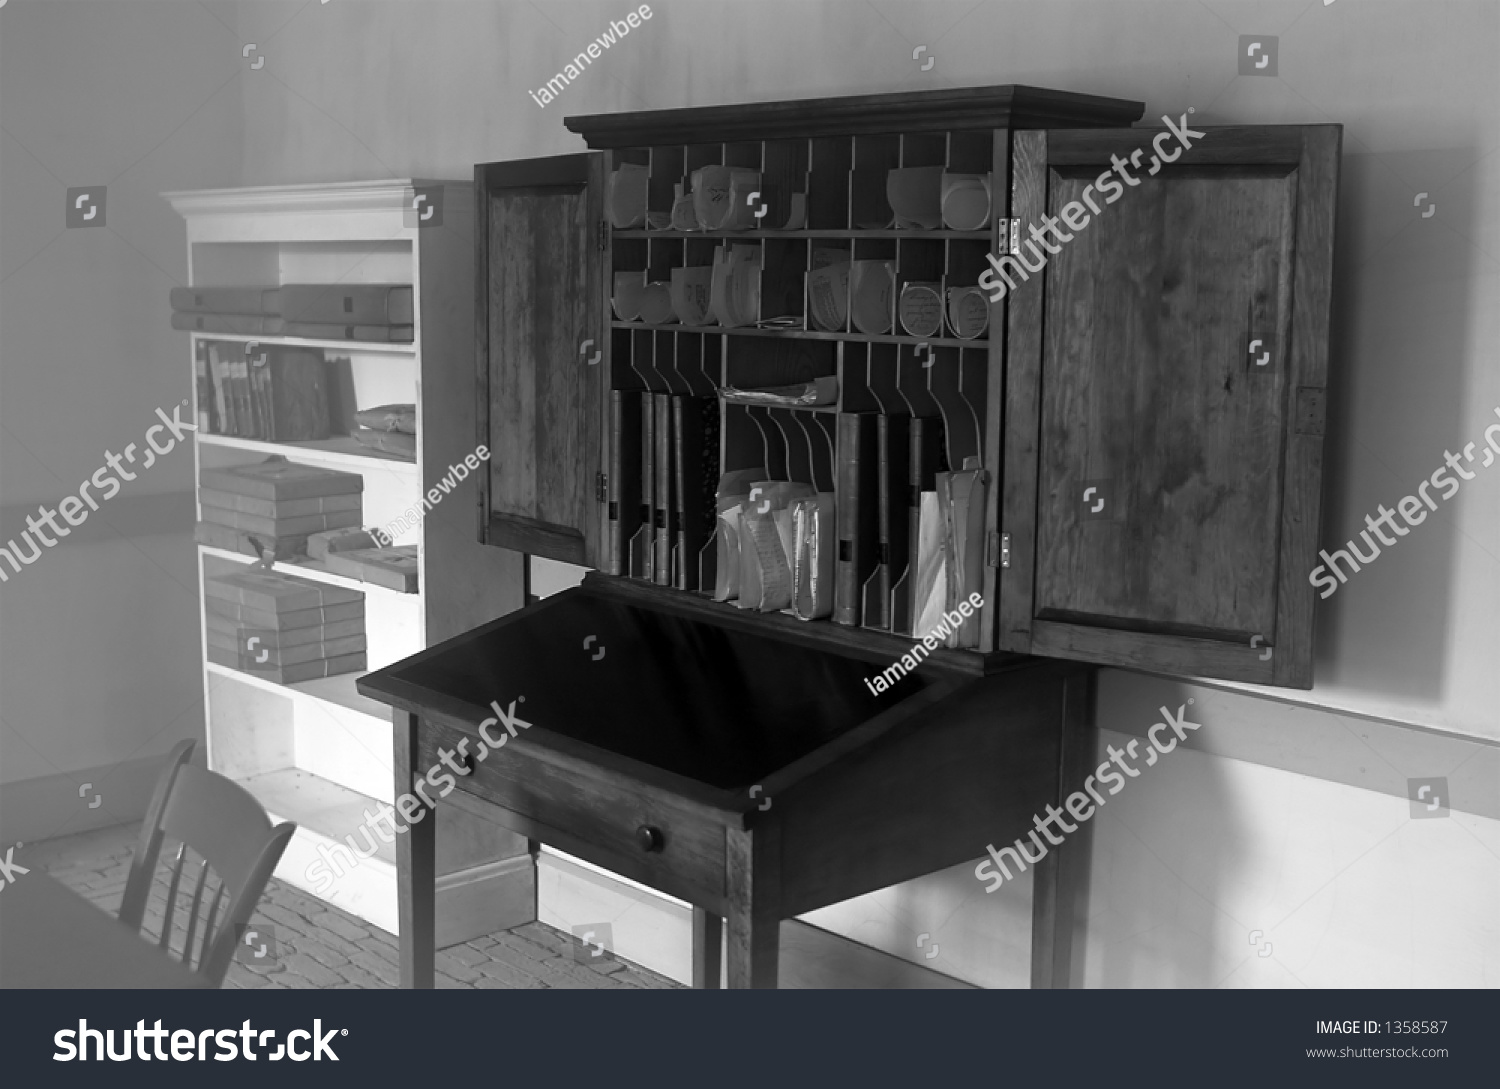 Bw Pigeon Hole Desk Maids Room Stock Photo Edit Now 1358587